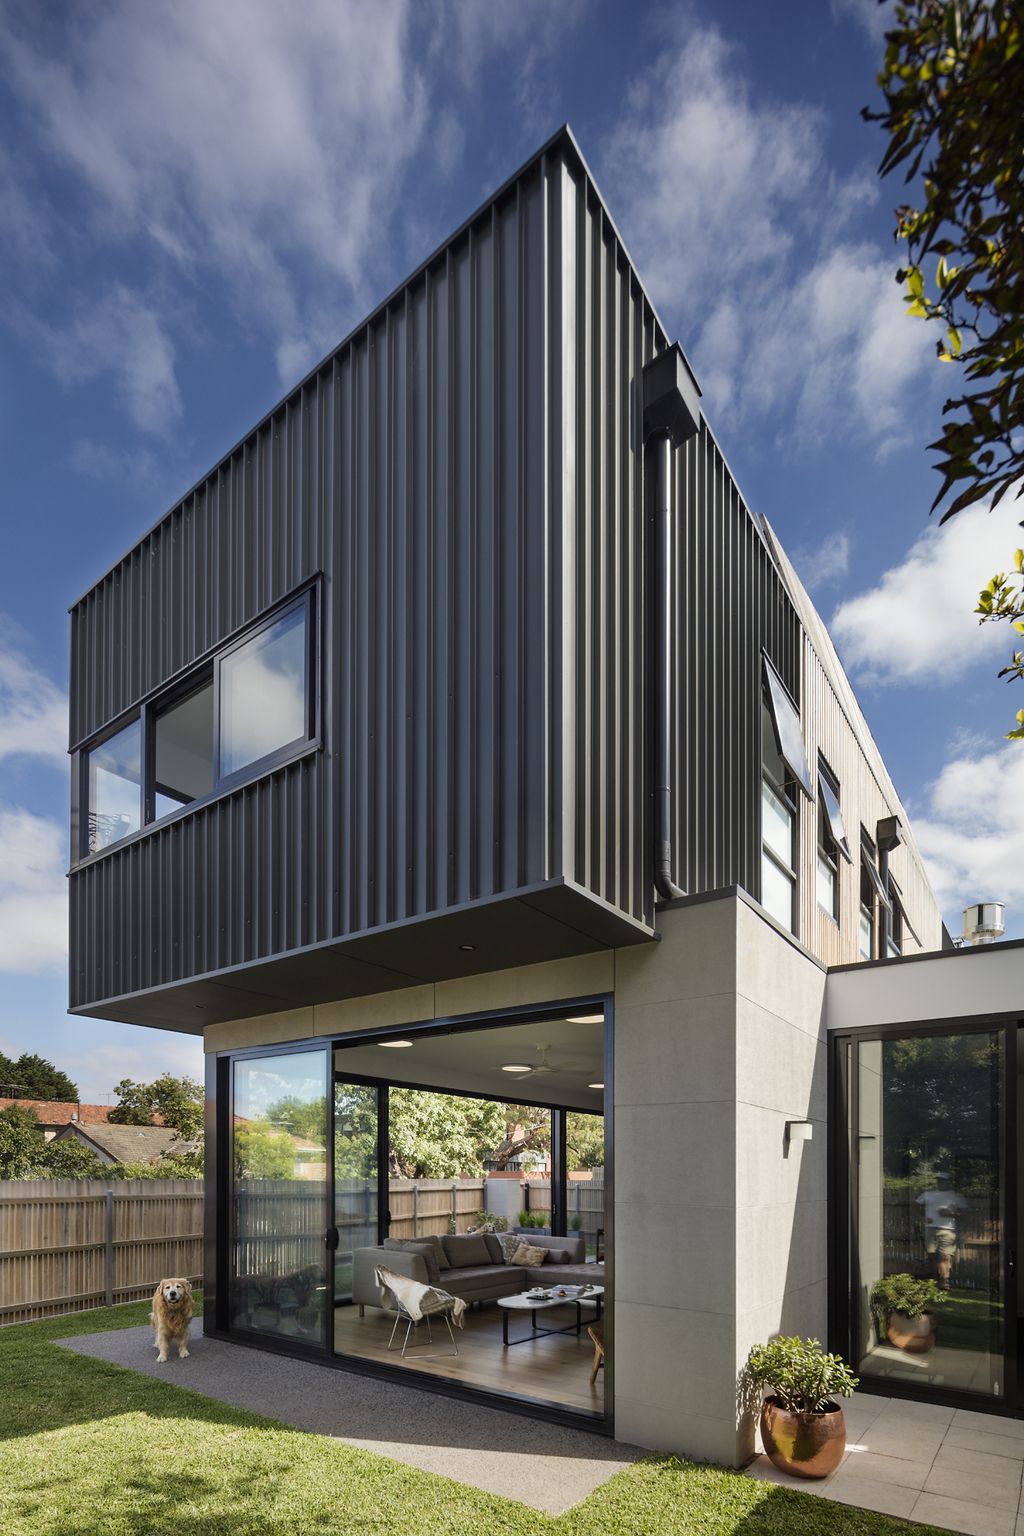 Prominent Presence of St Kilda East Townhouses by Jost Architects